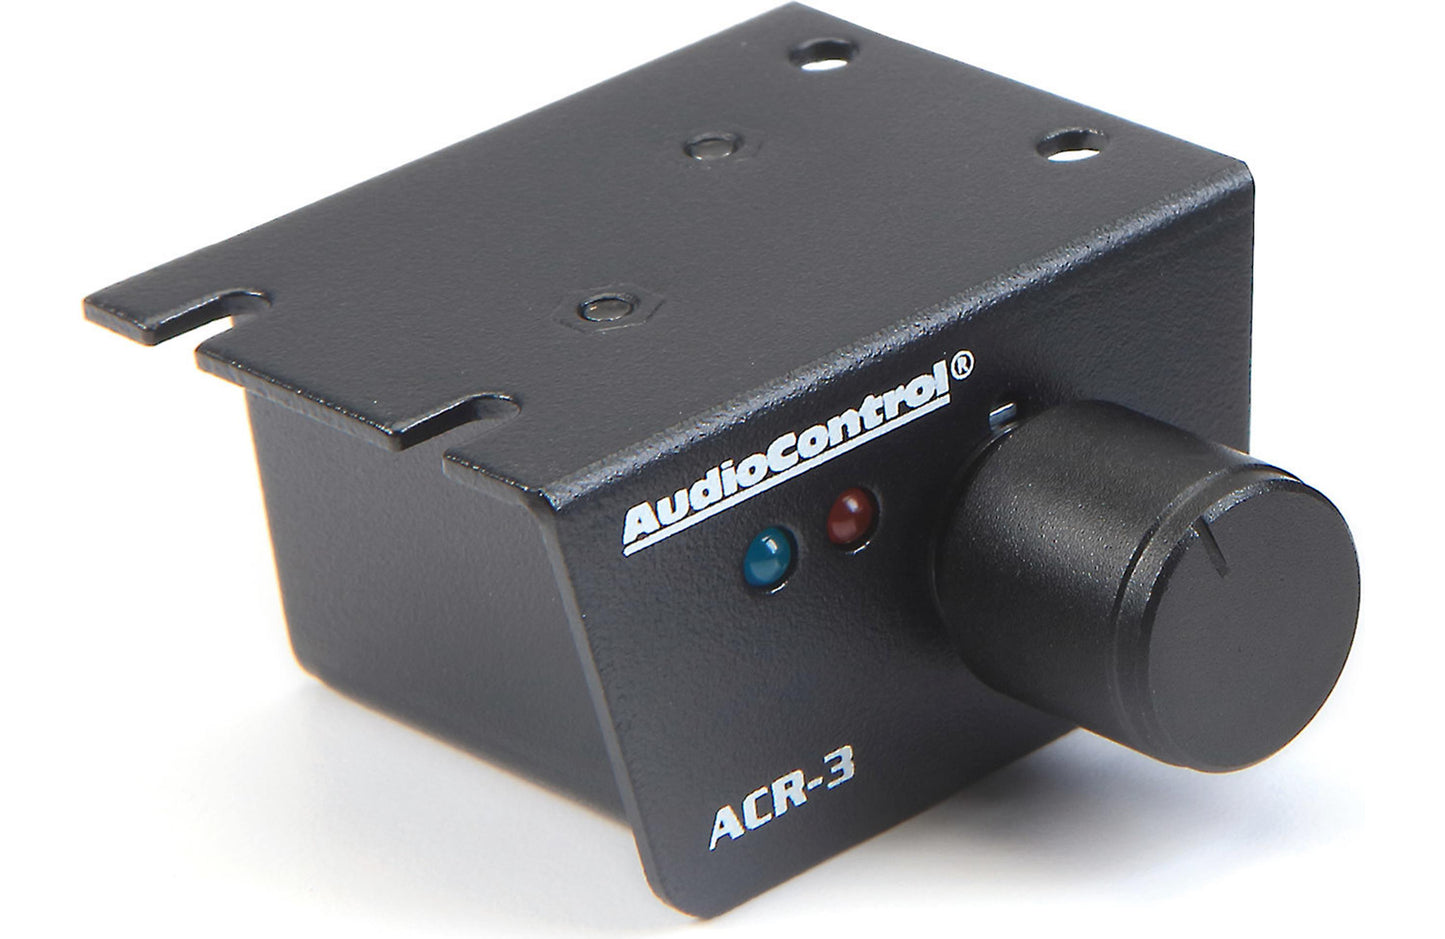 AudioControl ACR-3 Wired remote/source changer for select AudioControl processors